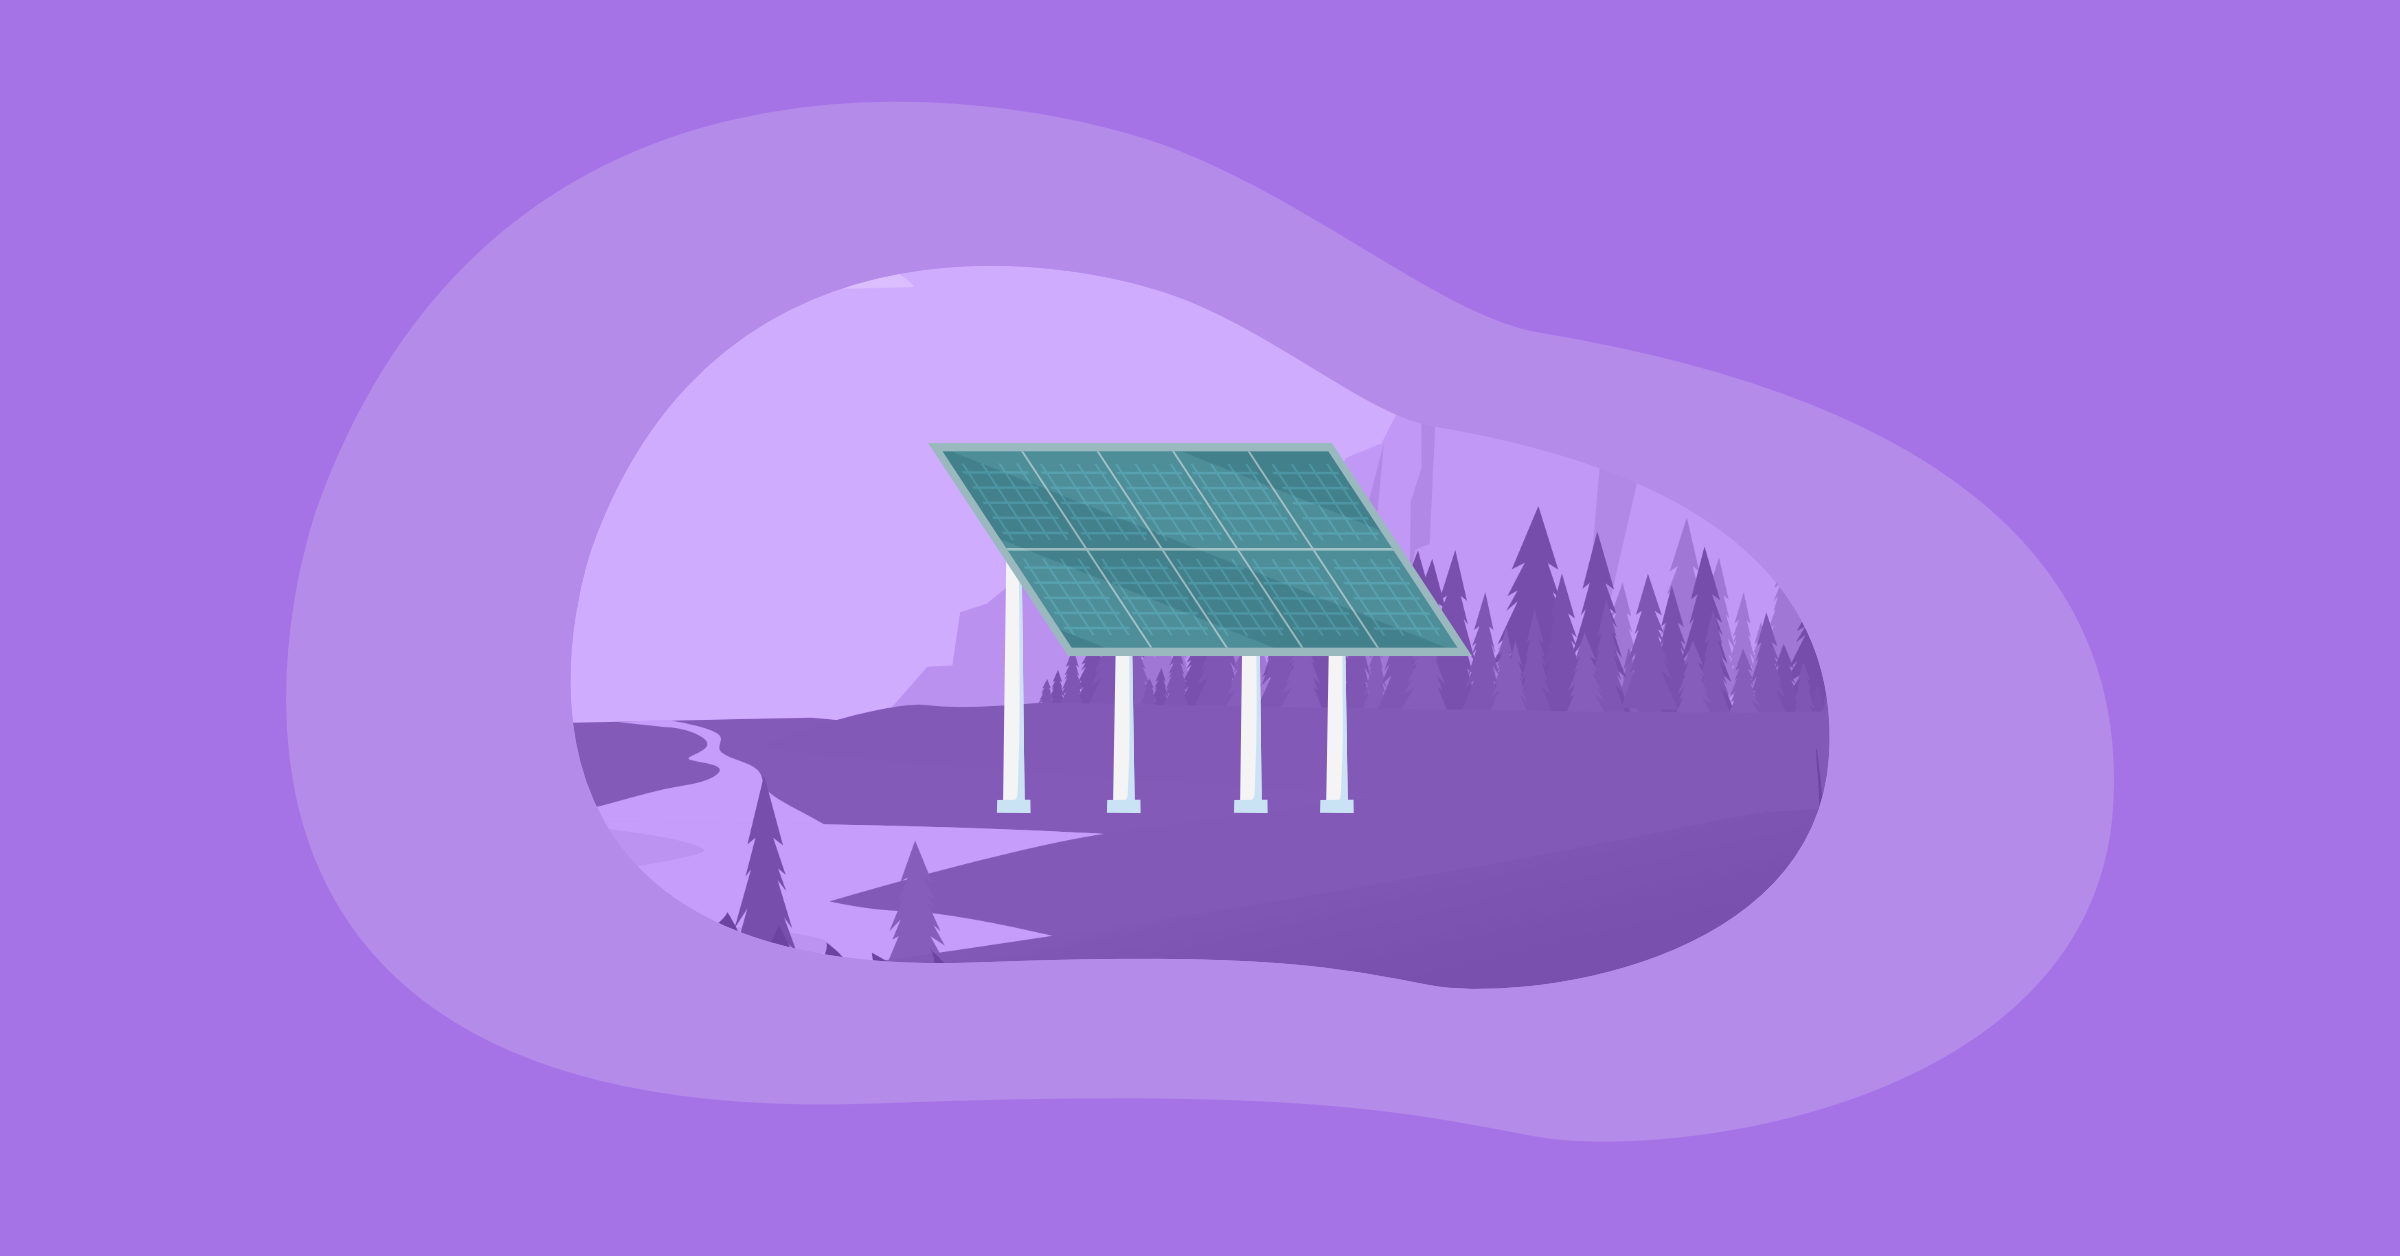 Illustration of a PV for solar energy